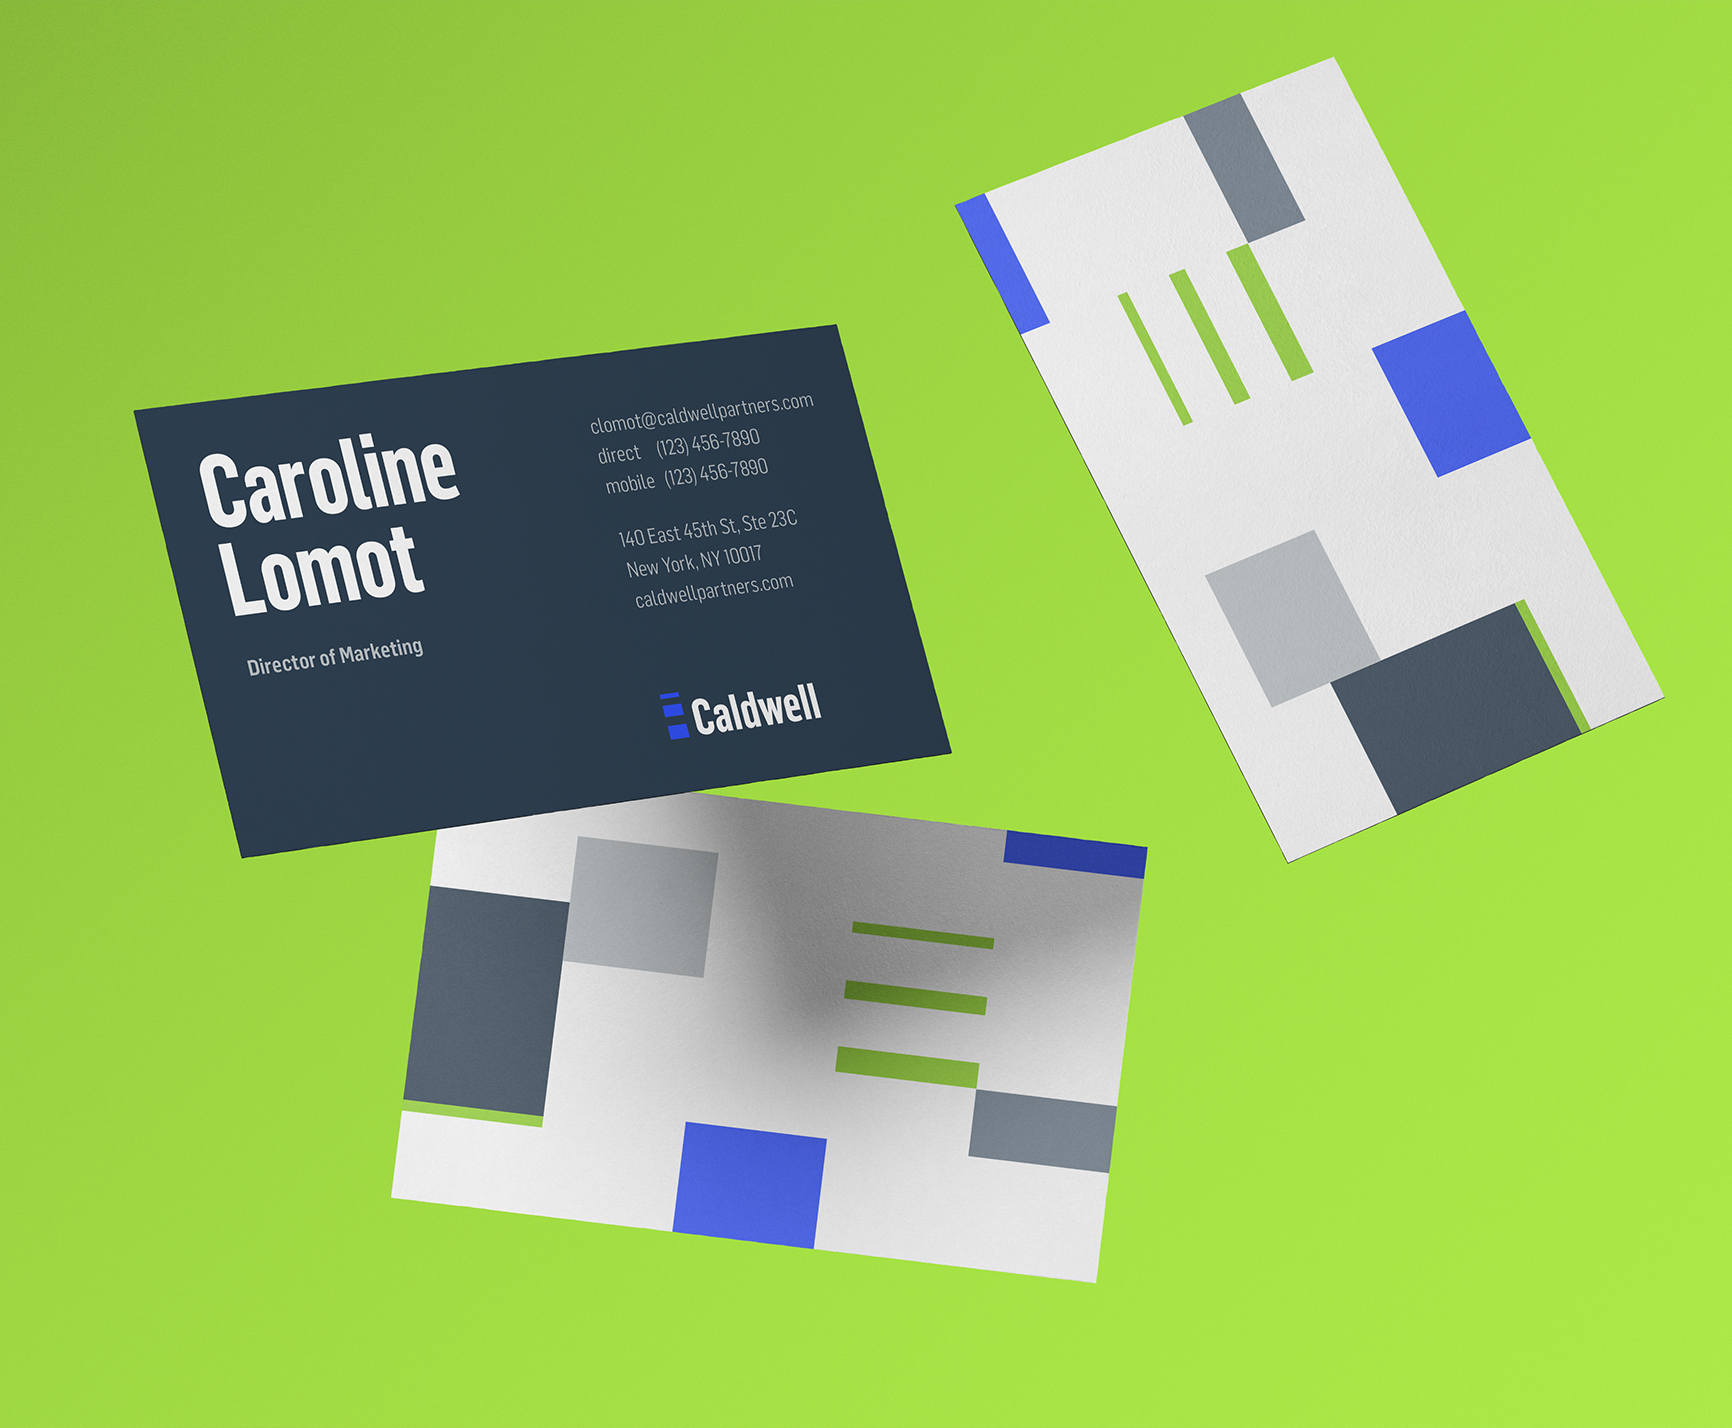 Image of three Caldwell business cards designed by MDG Solutions feature image